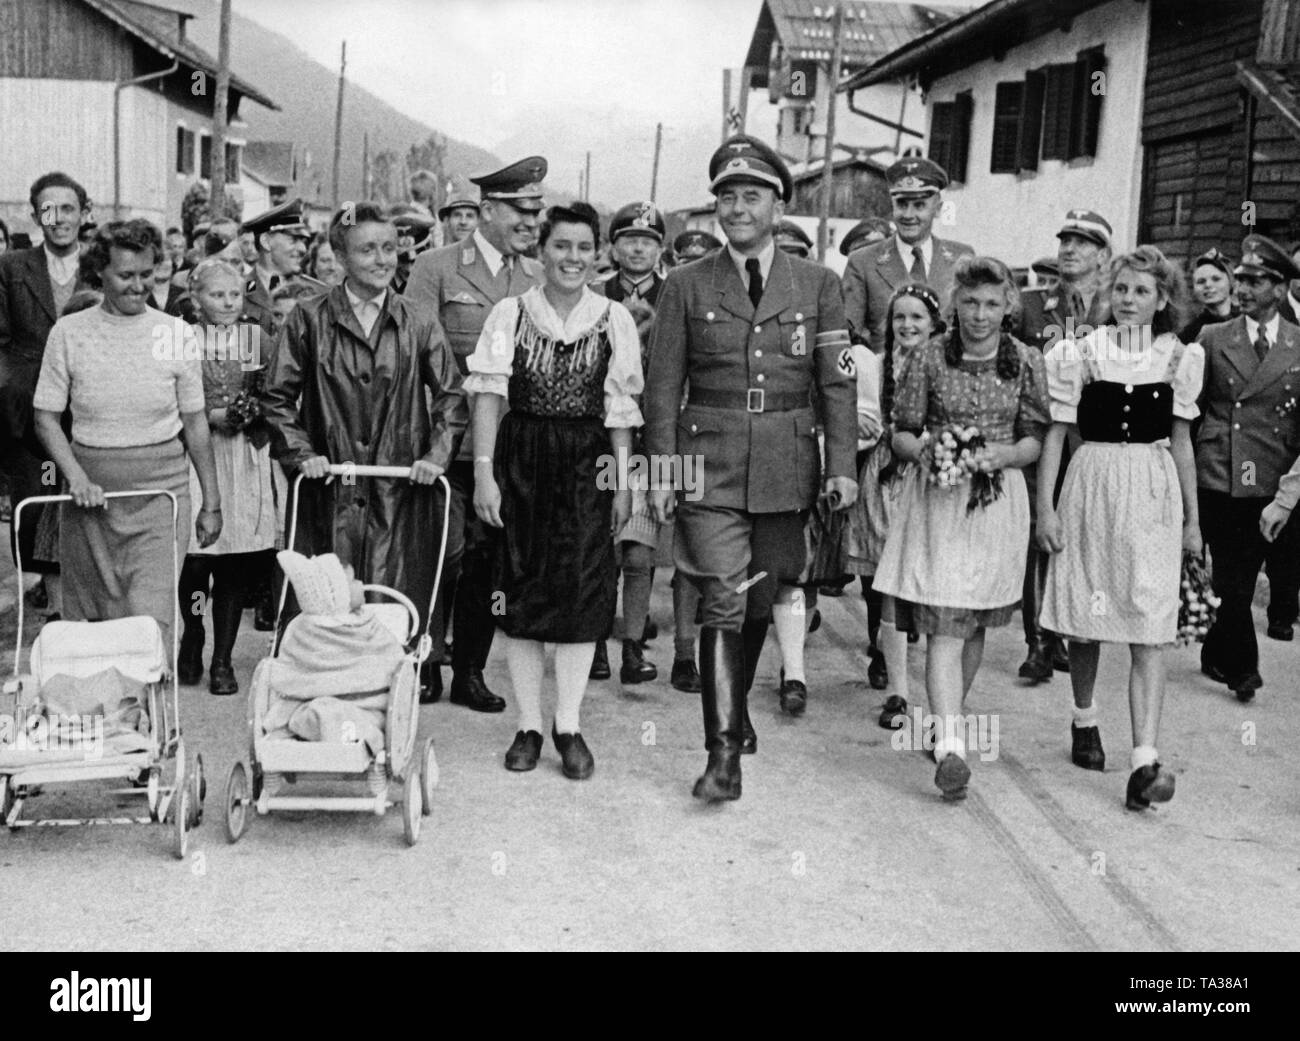 Albert Speer (front) visits Heinz Guderian (left behind him) Seefeld in Tirol. The place served as a resort for soldiers of the armored corps and for armament workers, who were engaged in tank manufacturing. Here they walk through the streets of the village. In the second row at left, before Heinz Guderian, the Gauleiter of Tirol-Vorarlberg Franz Hofer. Stock Photo